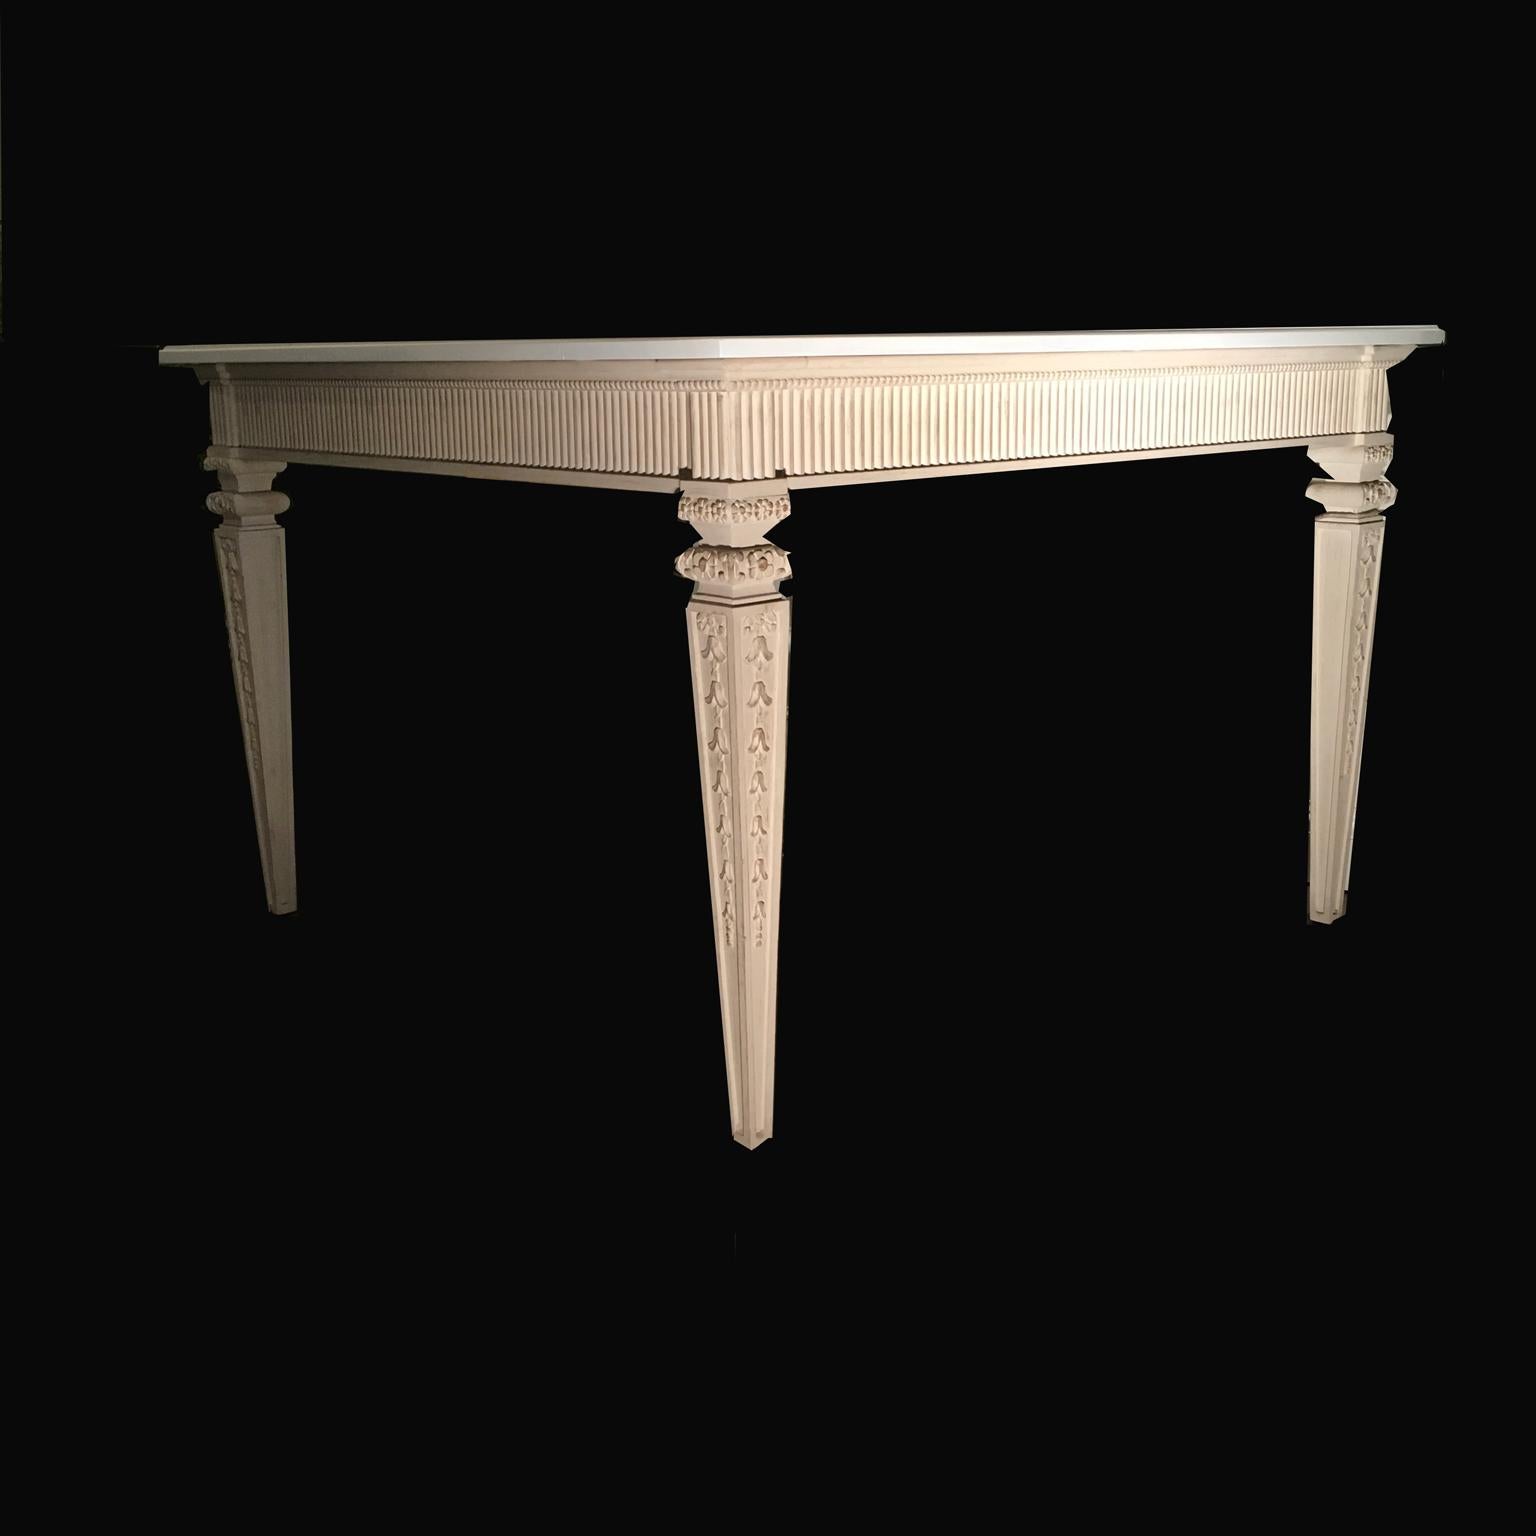 This is an elegant French dining table in solid oak, with rich hand-carved details on the legs. It has a double colors: the top is hand lacquered in white egg color and the four legs with the band under the top is hand lacquered in ivory color. This